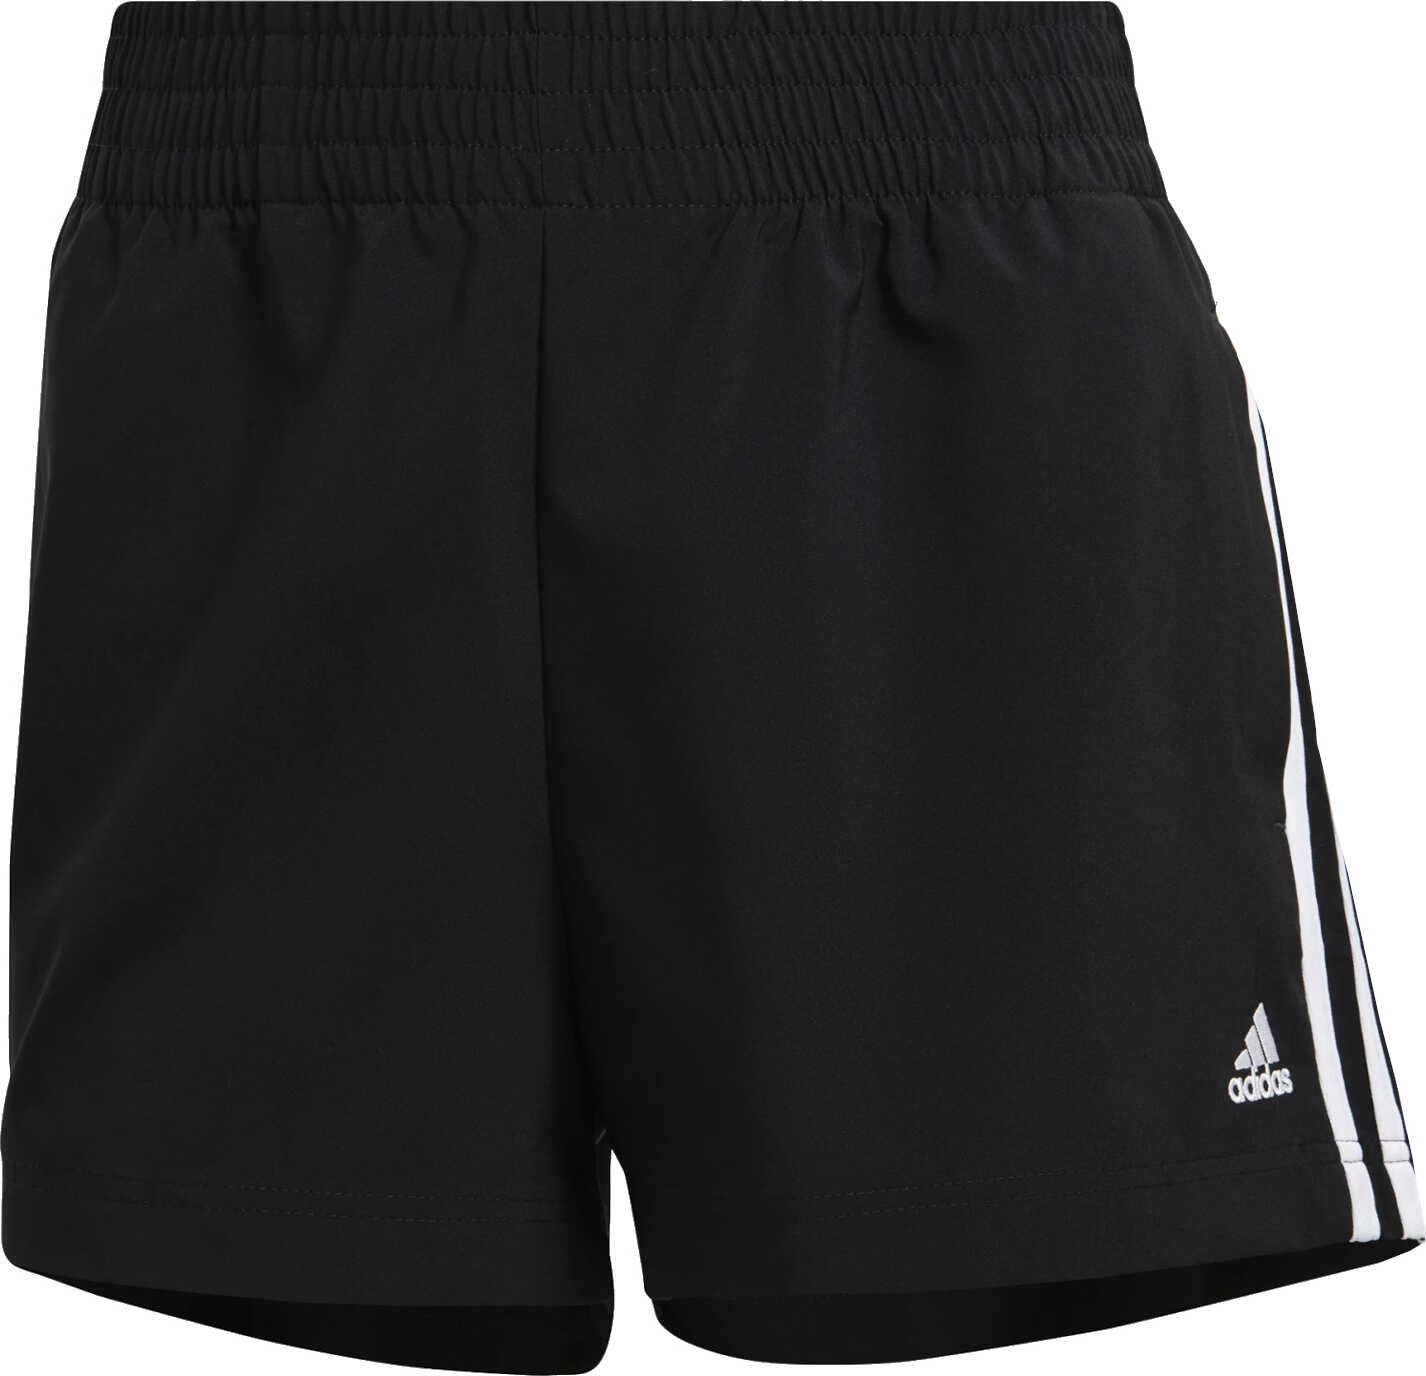 adidas Performance adidas Essentials Relaxed Woven 3-Stripes Shorts Black image12